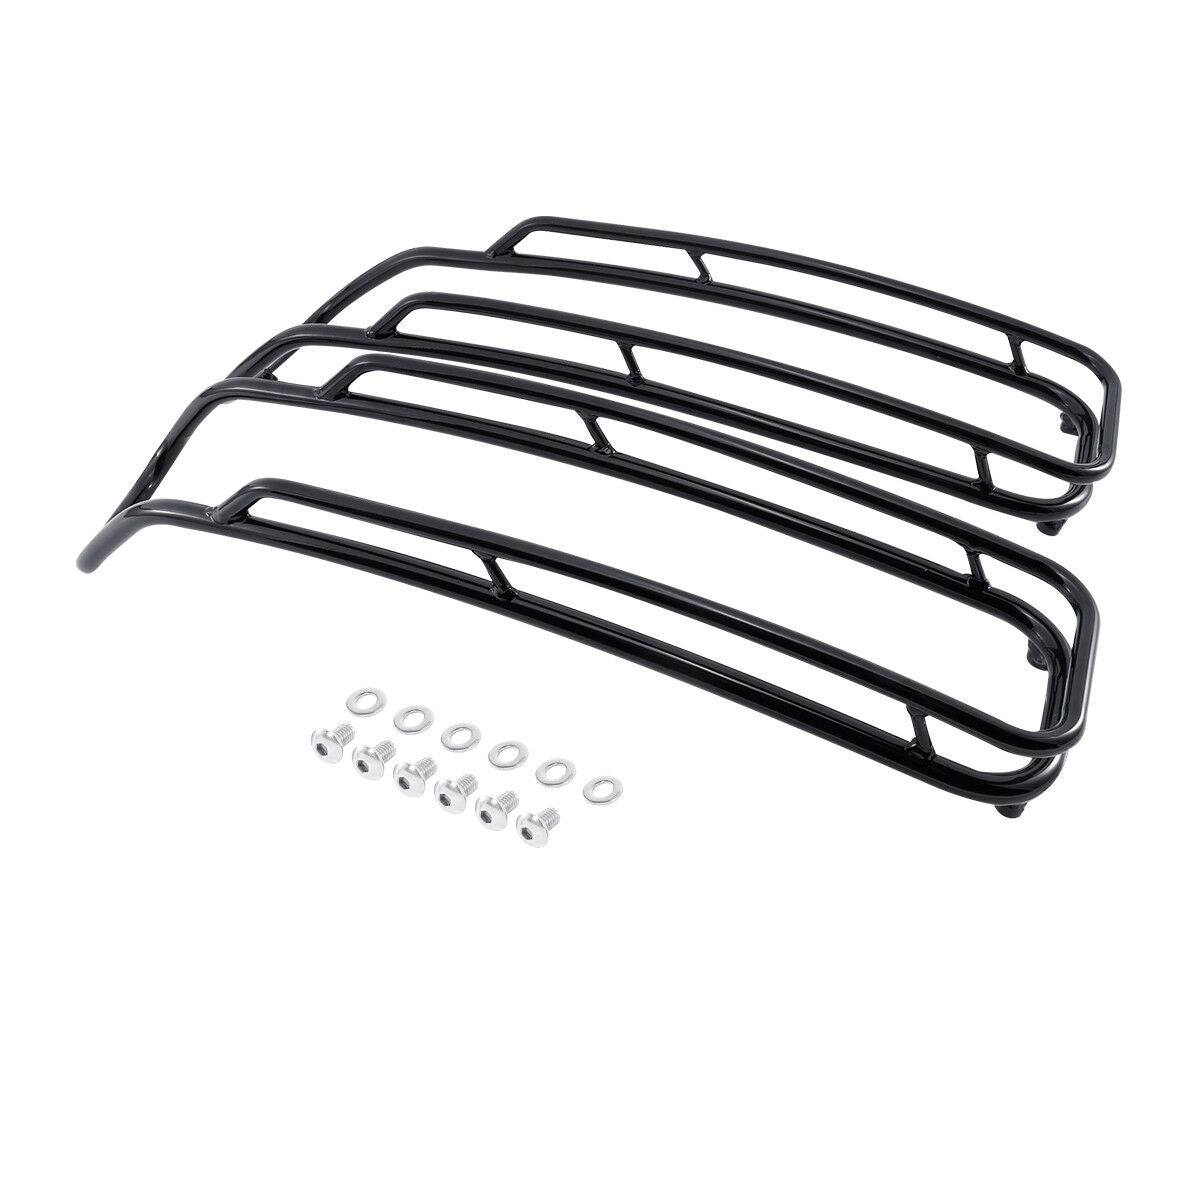 Saddlebags Lid Top Rail Guards Fit For Harley Touring Road King Glide 2014-2021 - Moto Life Products